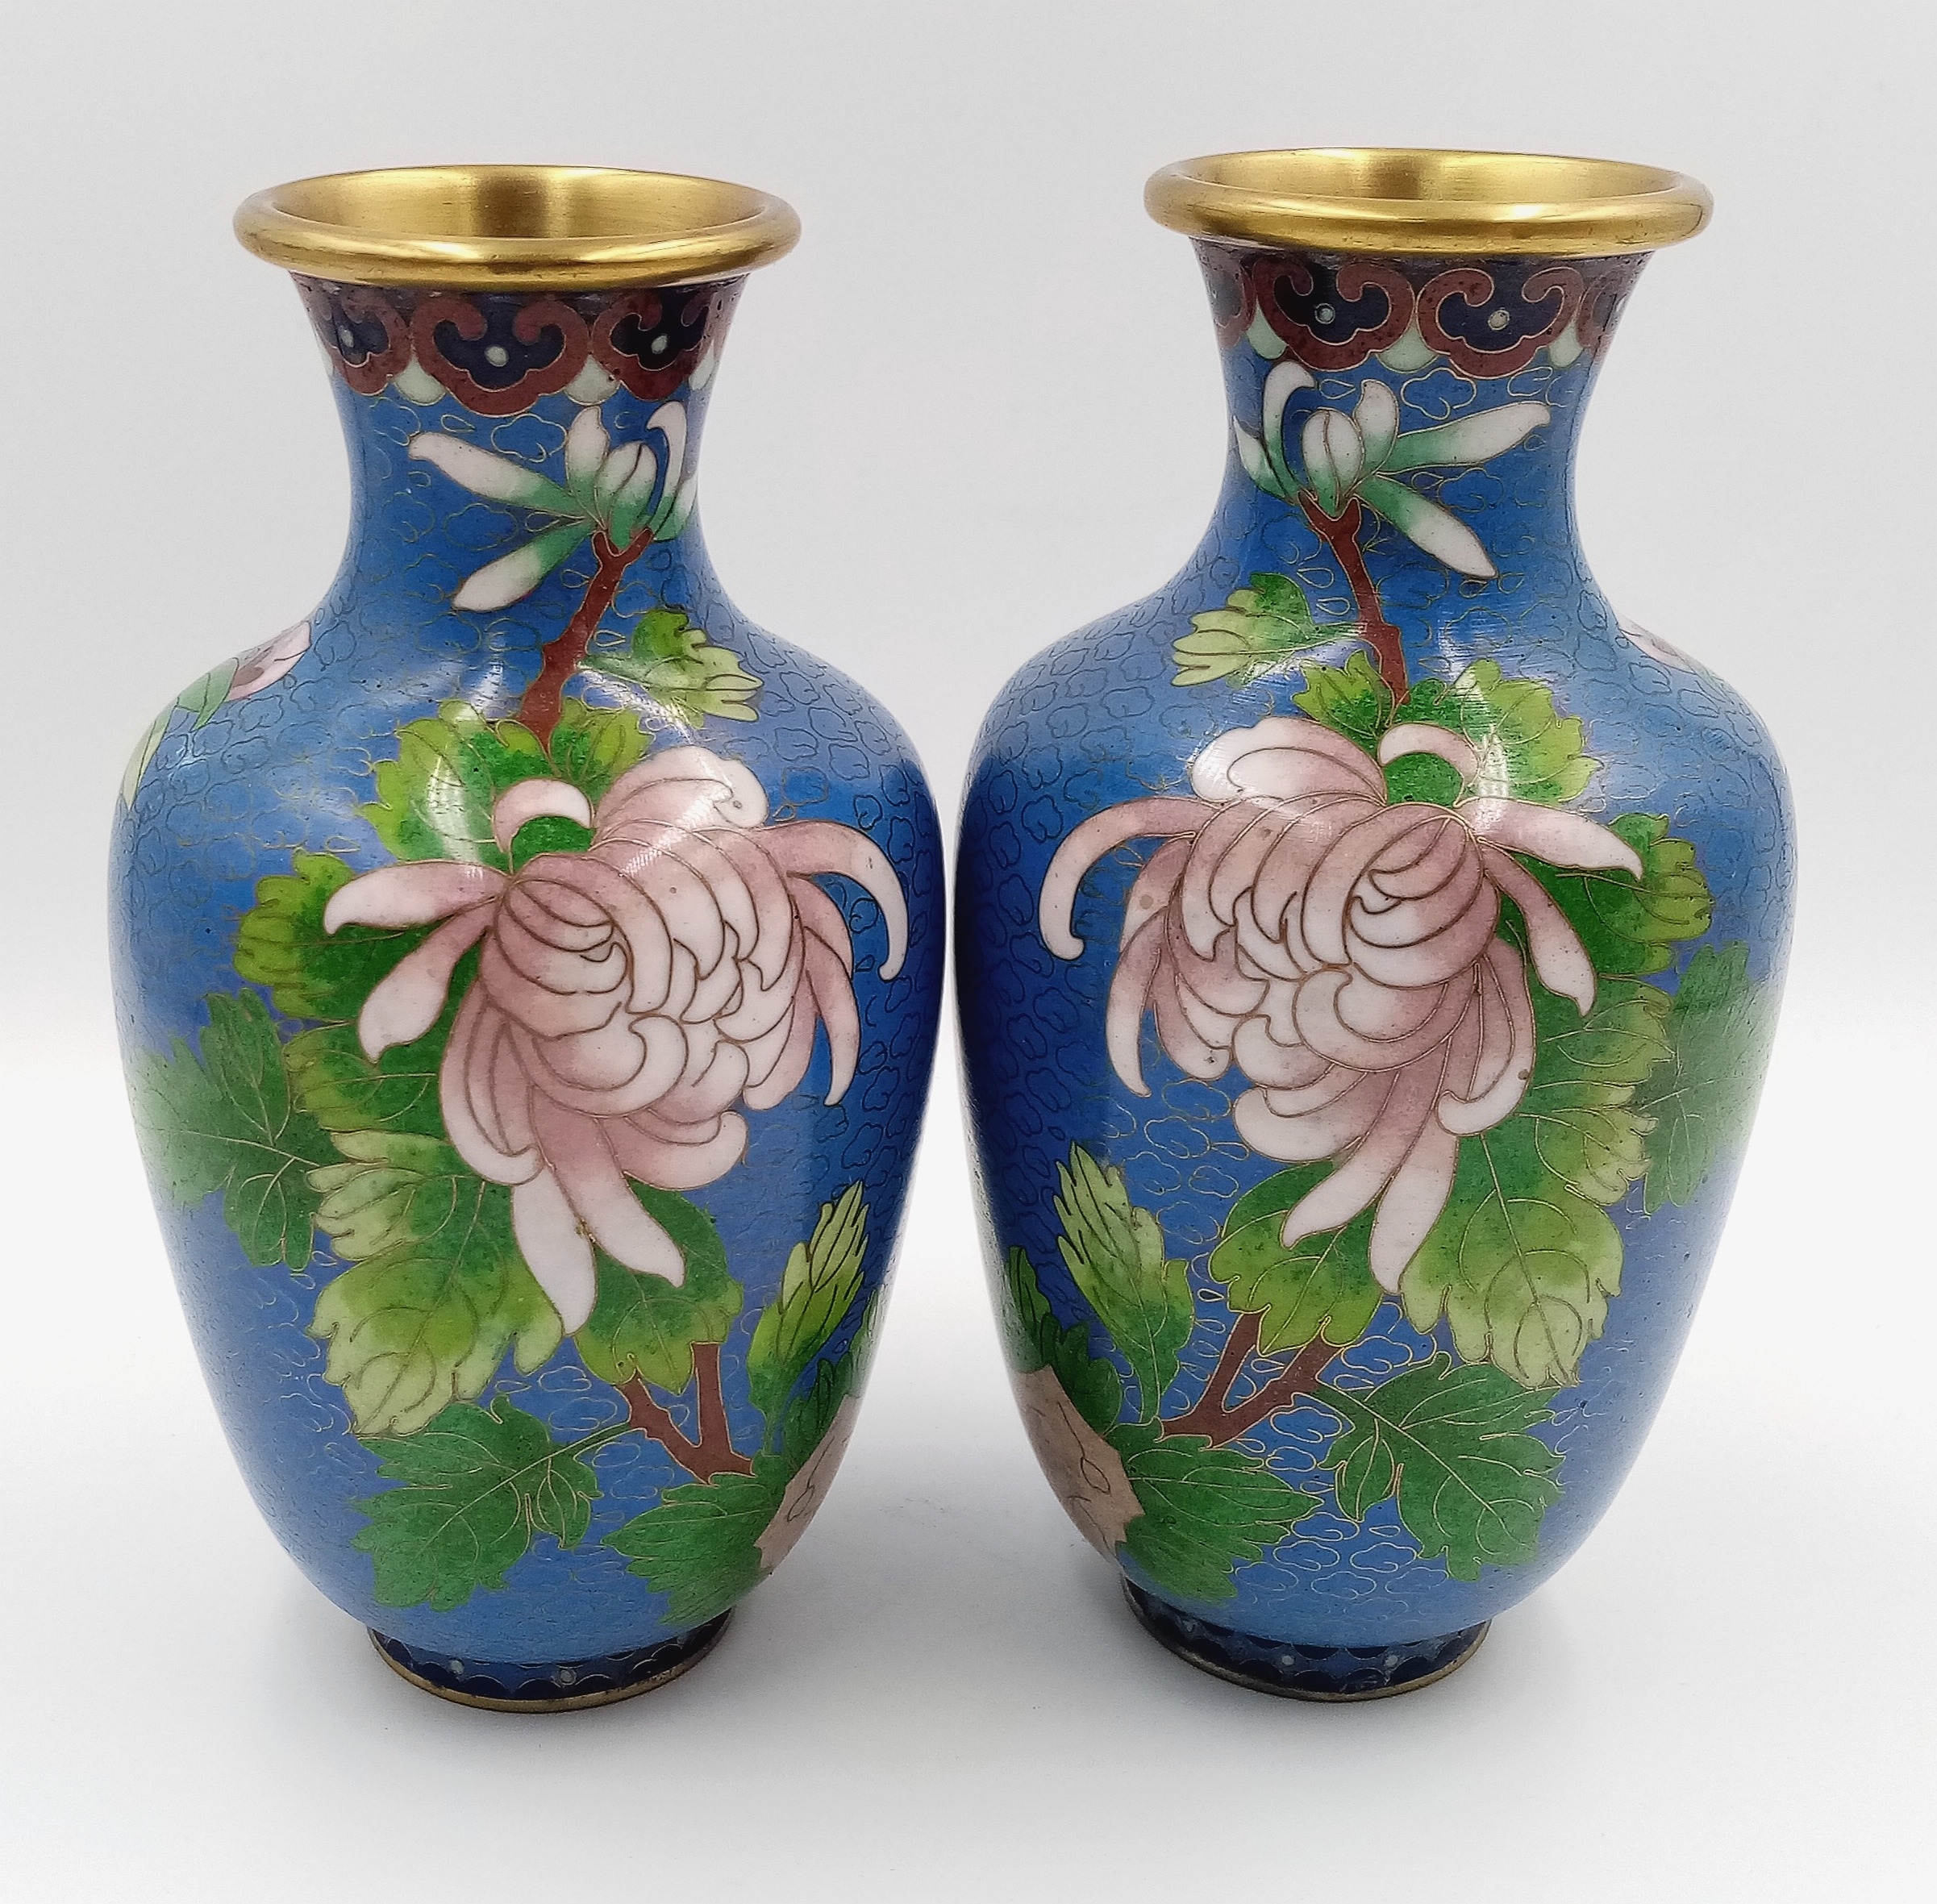 A Pair of Vintage Chinese Cloisonné Sky Blue Decorative Vases. 16cm tall. In fitted case.